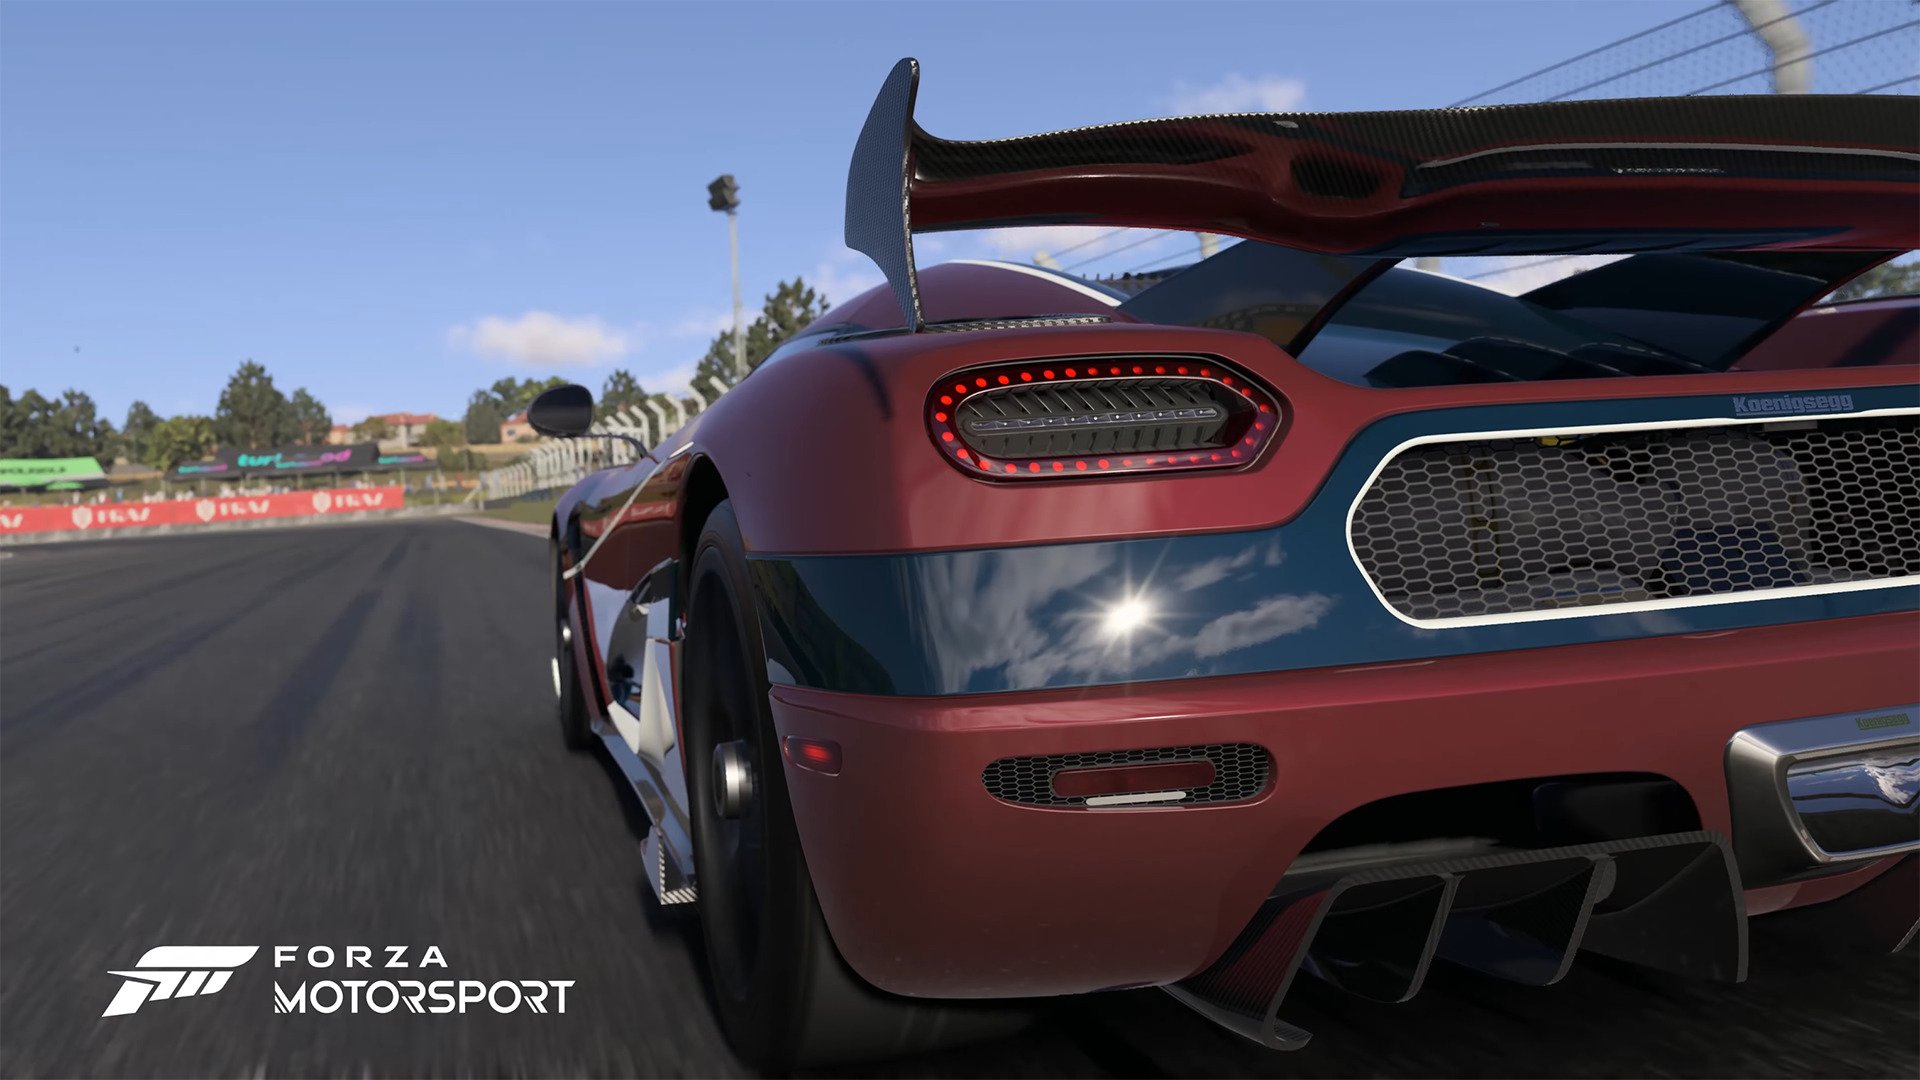 Microsoft Turns a Corner With Forza Motorsport 6: Apex, PC Release This  Spring – GTPlanet